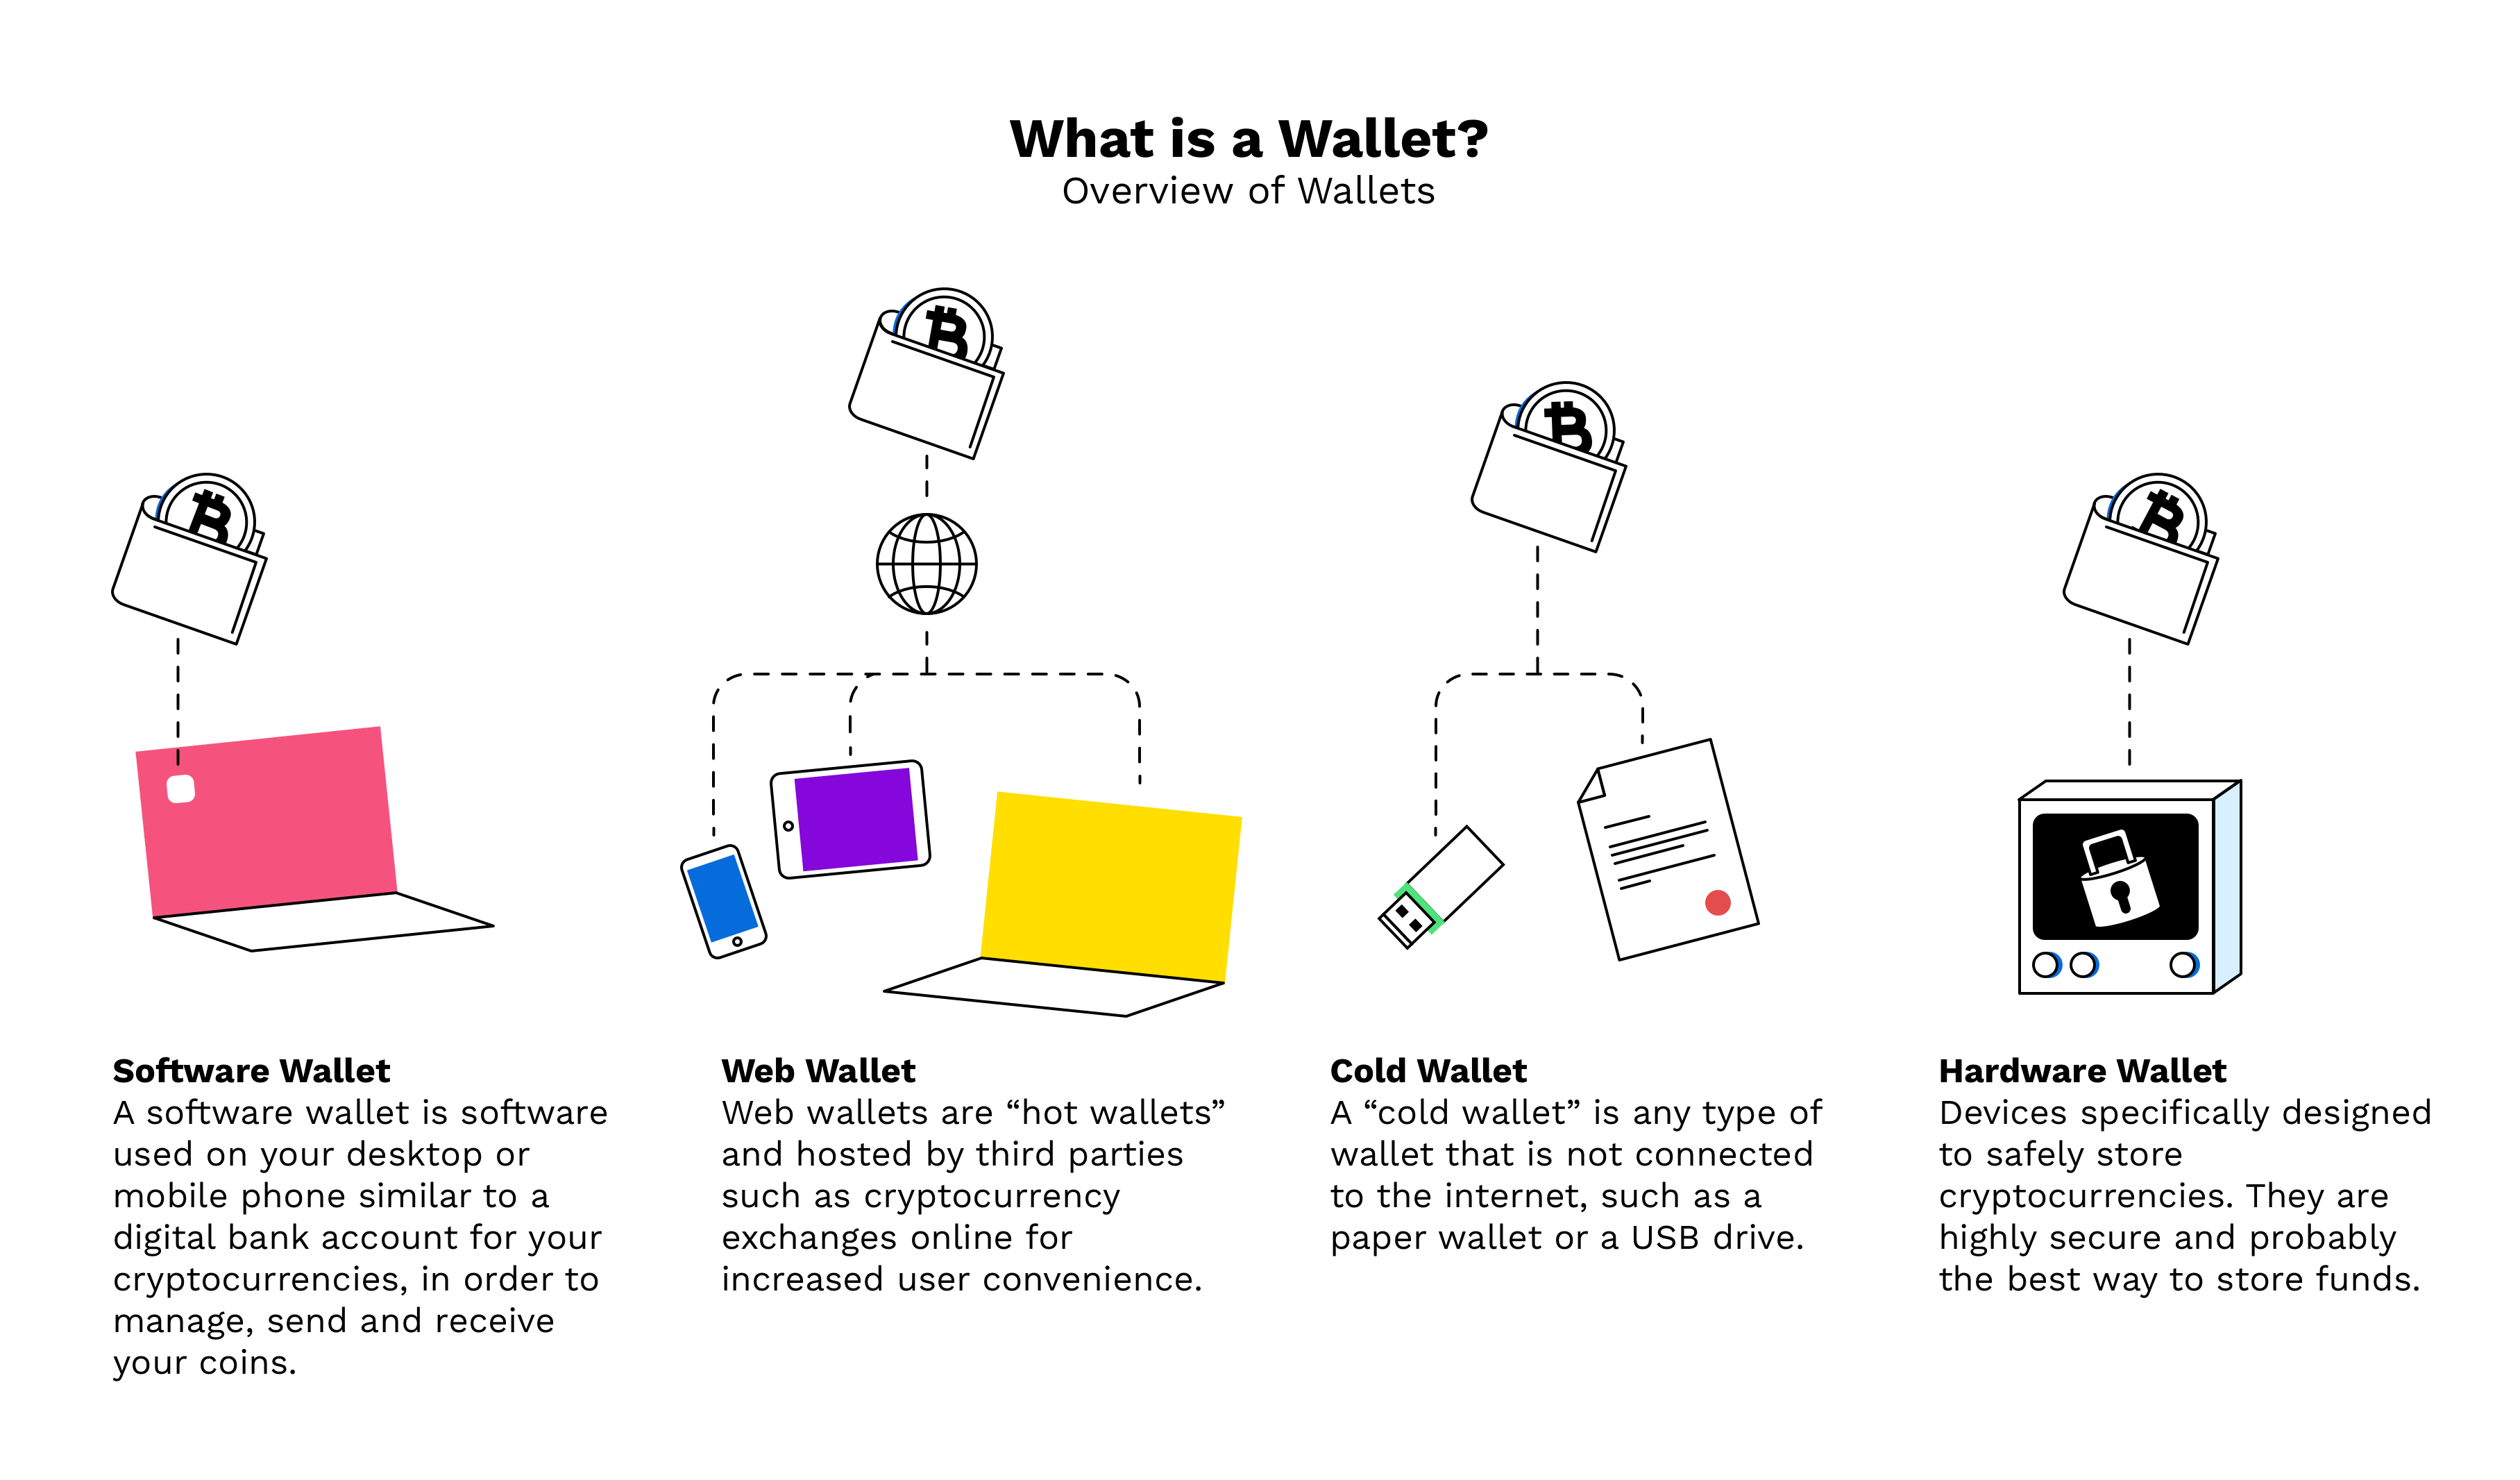 how transfer money from bank to blockchain wallet